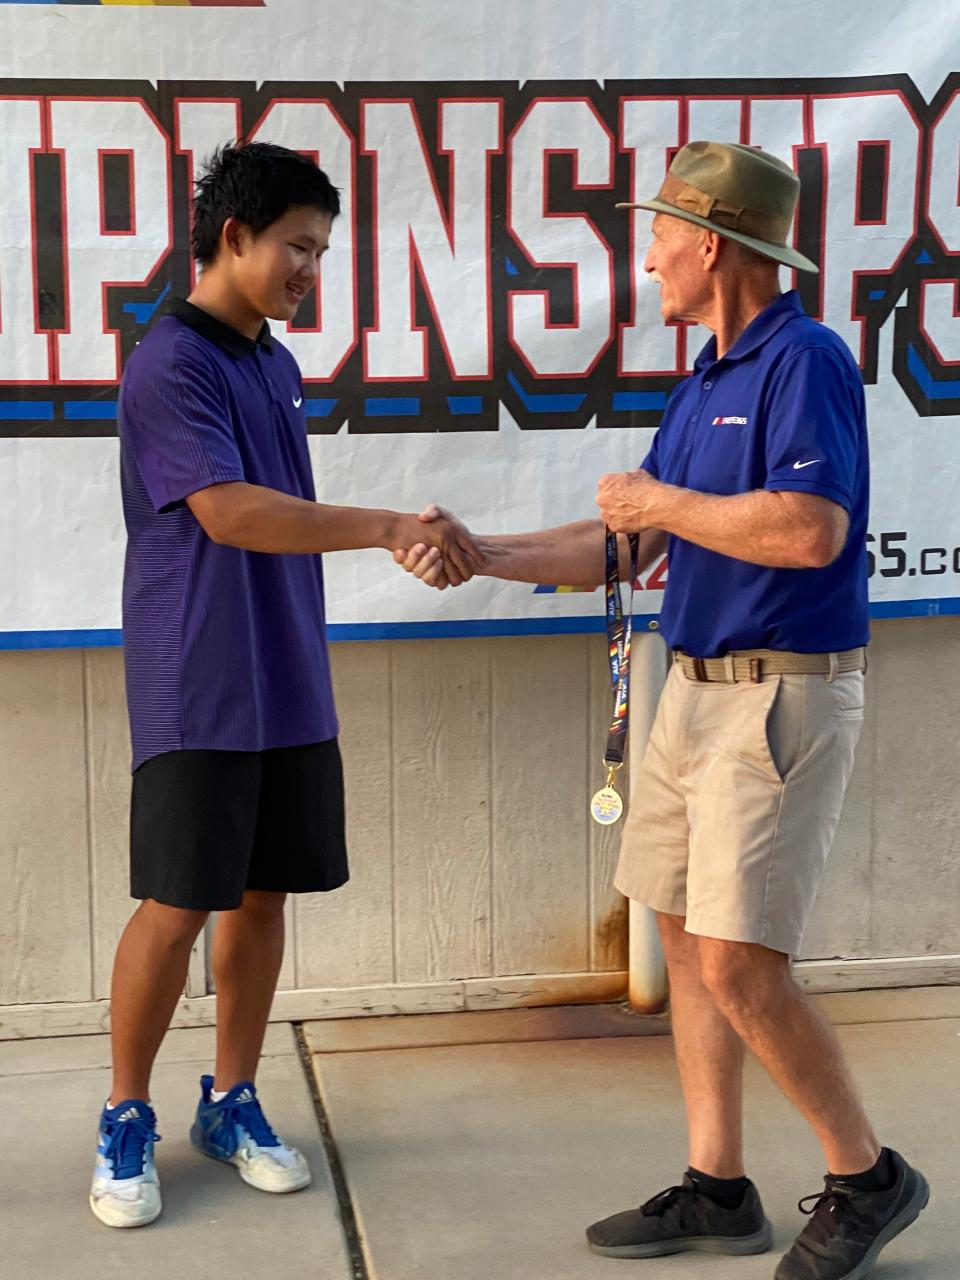 Andrew Yang receives his medal. He became the second player from AZ College Prep to win the Division III Boys Singles title since 2015.